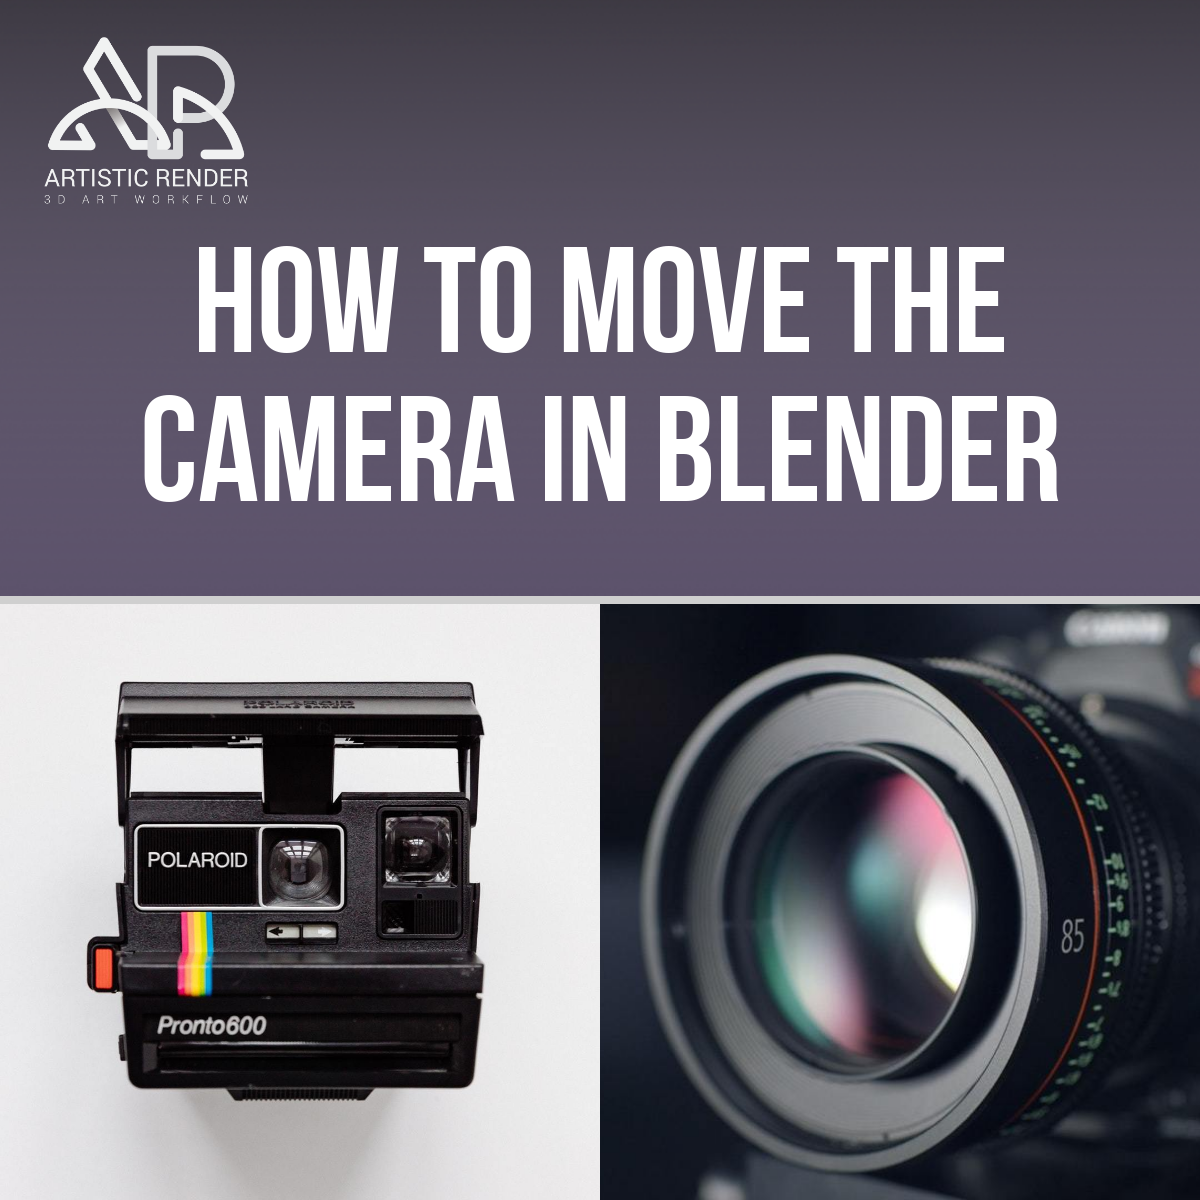 How to move the camera in Blender - Artisticrender.com